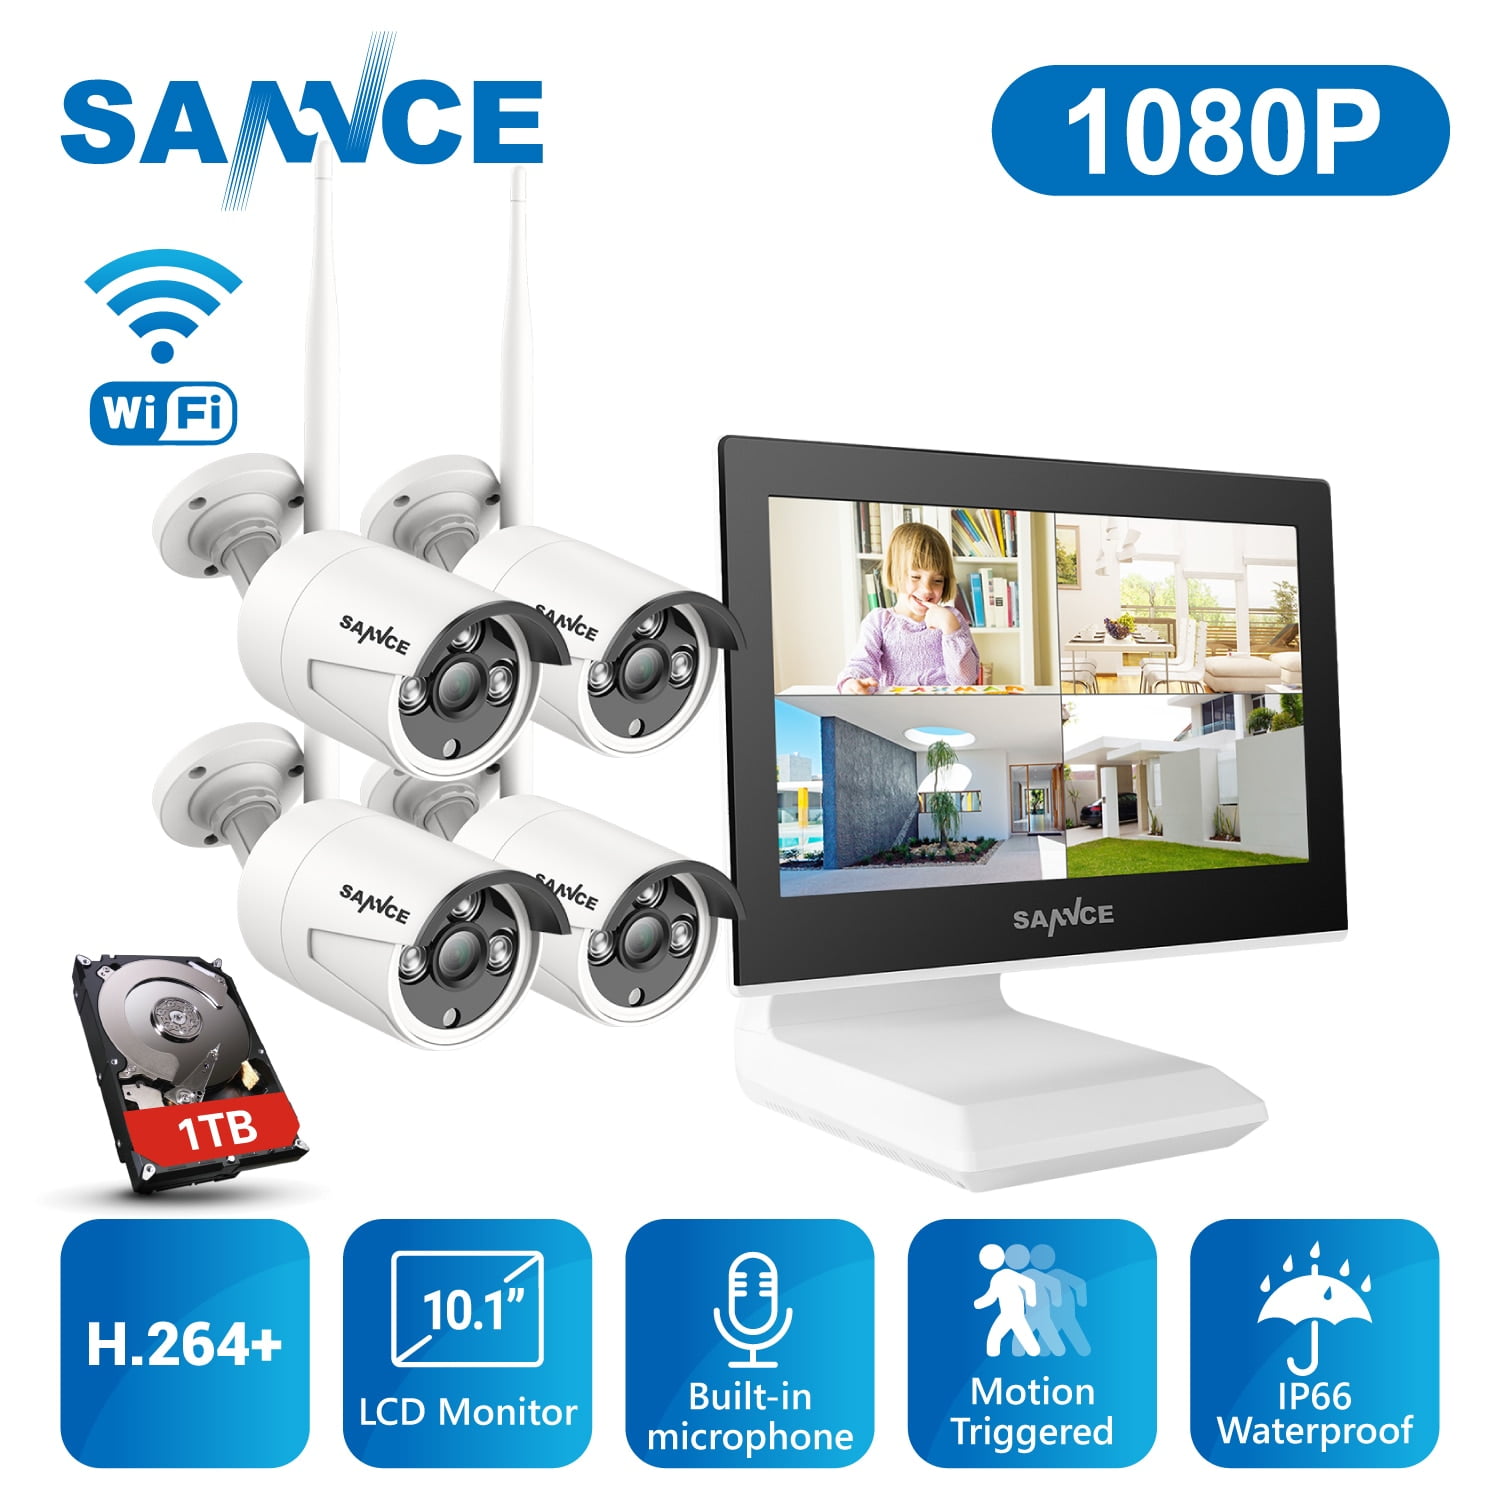 1080P Wireless Security Camera System Outdoor CCTV 4CH 7"LCD Monitor 1TB HDD NVR 